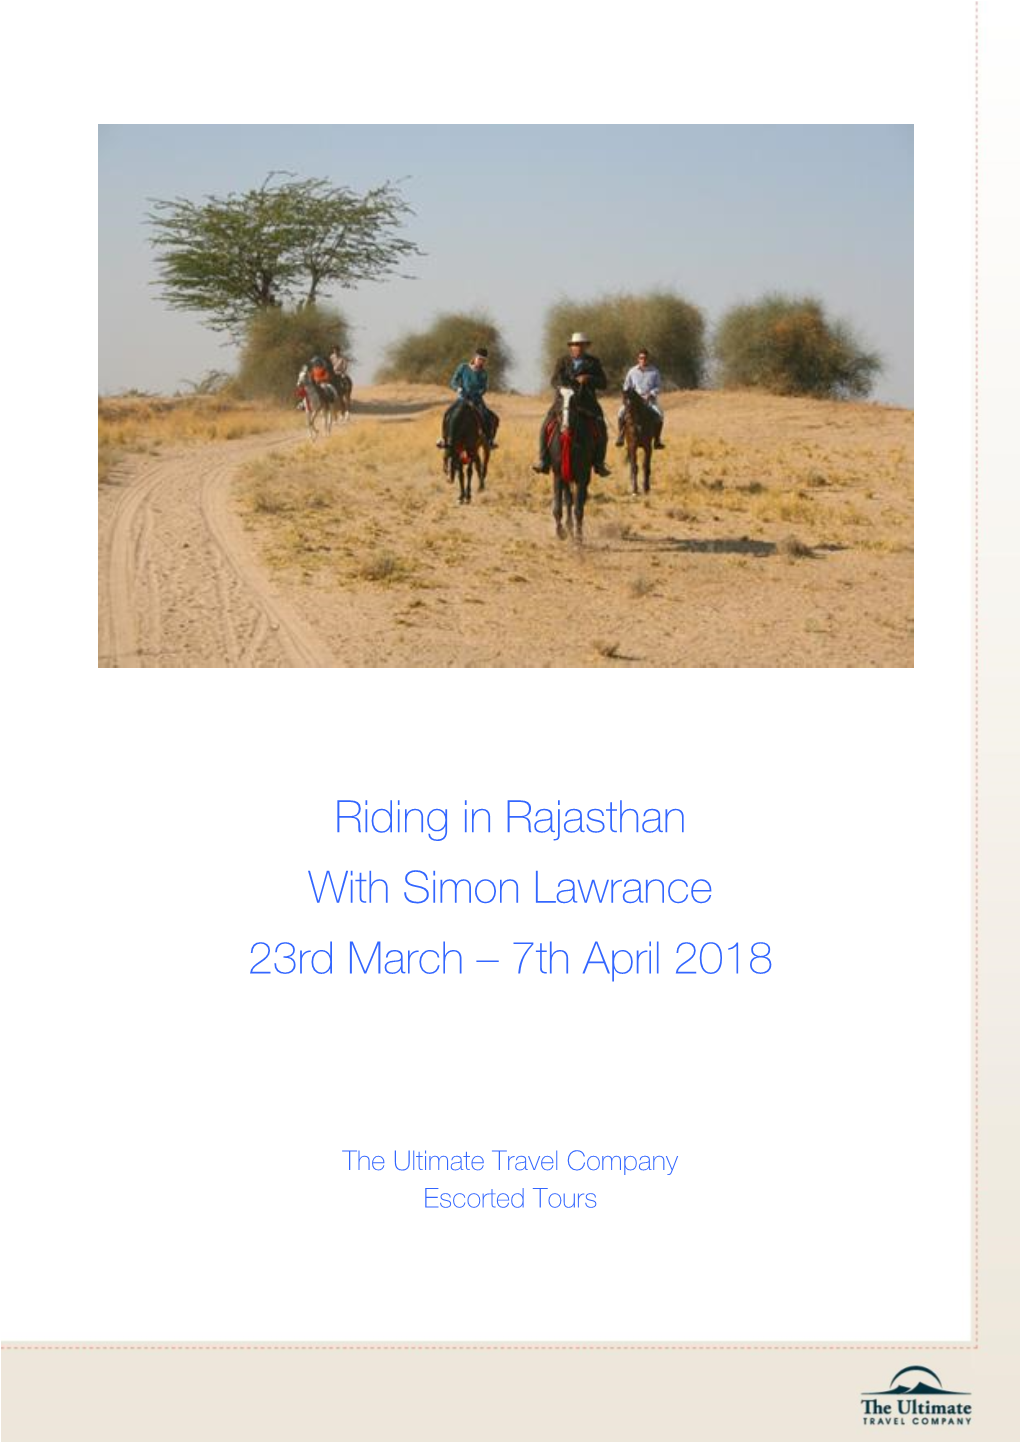 Riding in Rajasthan with Simon Lawrance 23Rd March – 7Th April 2018